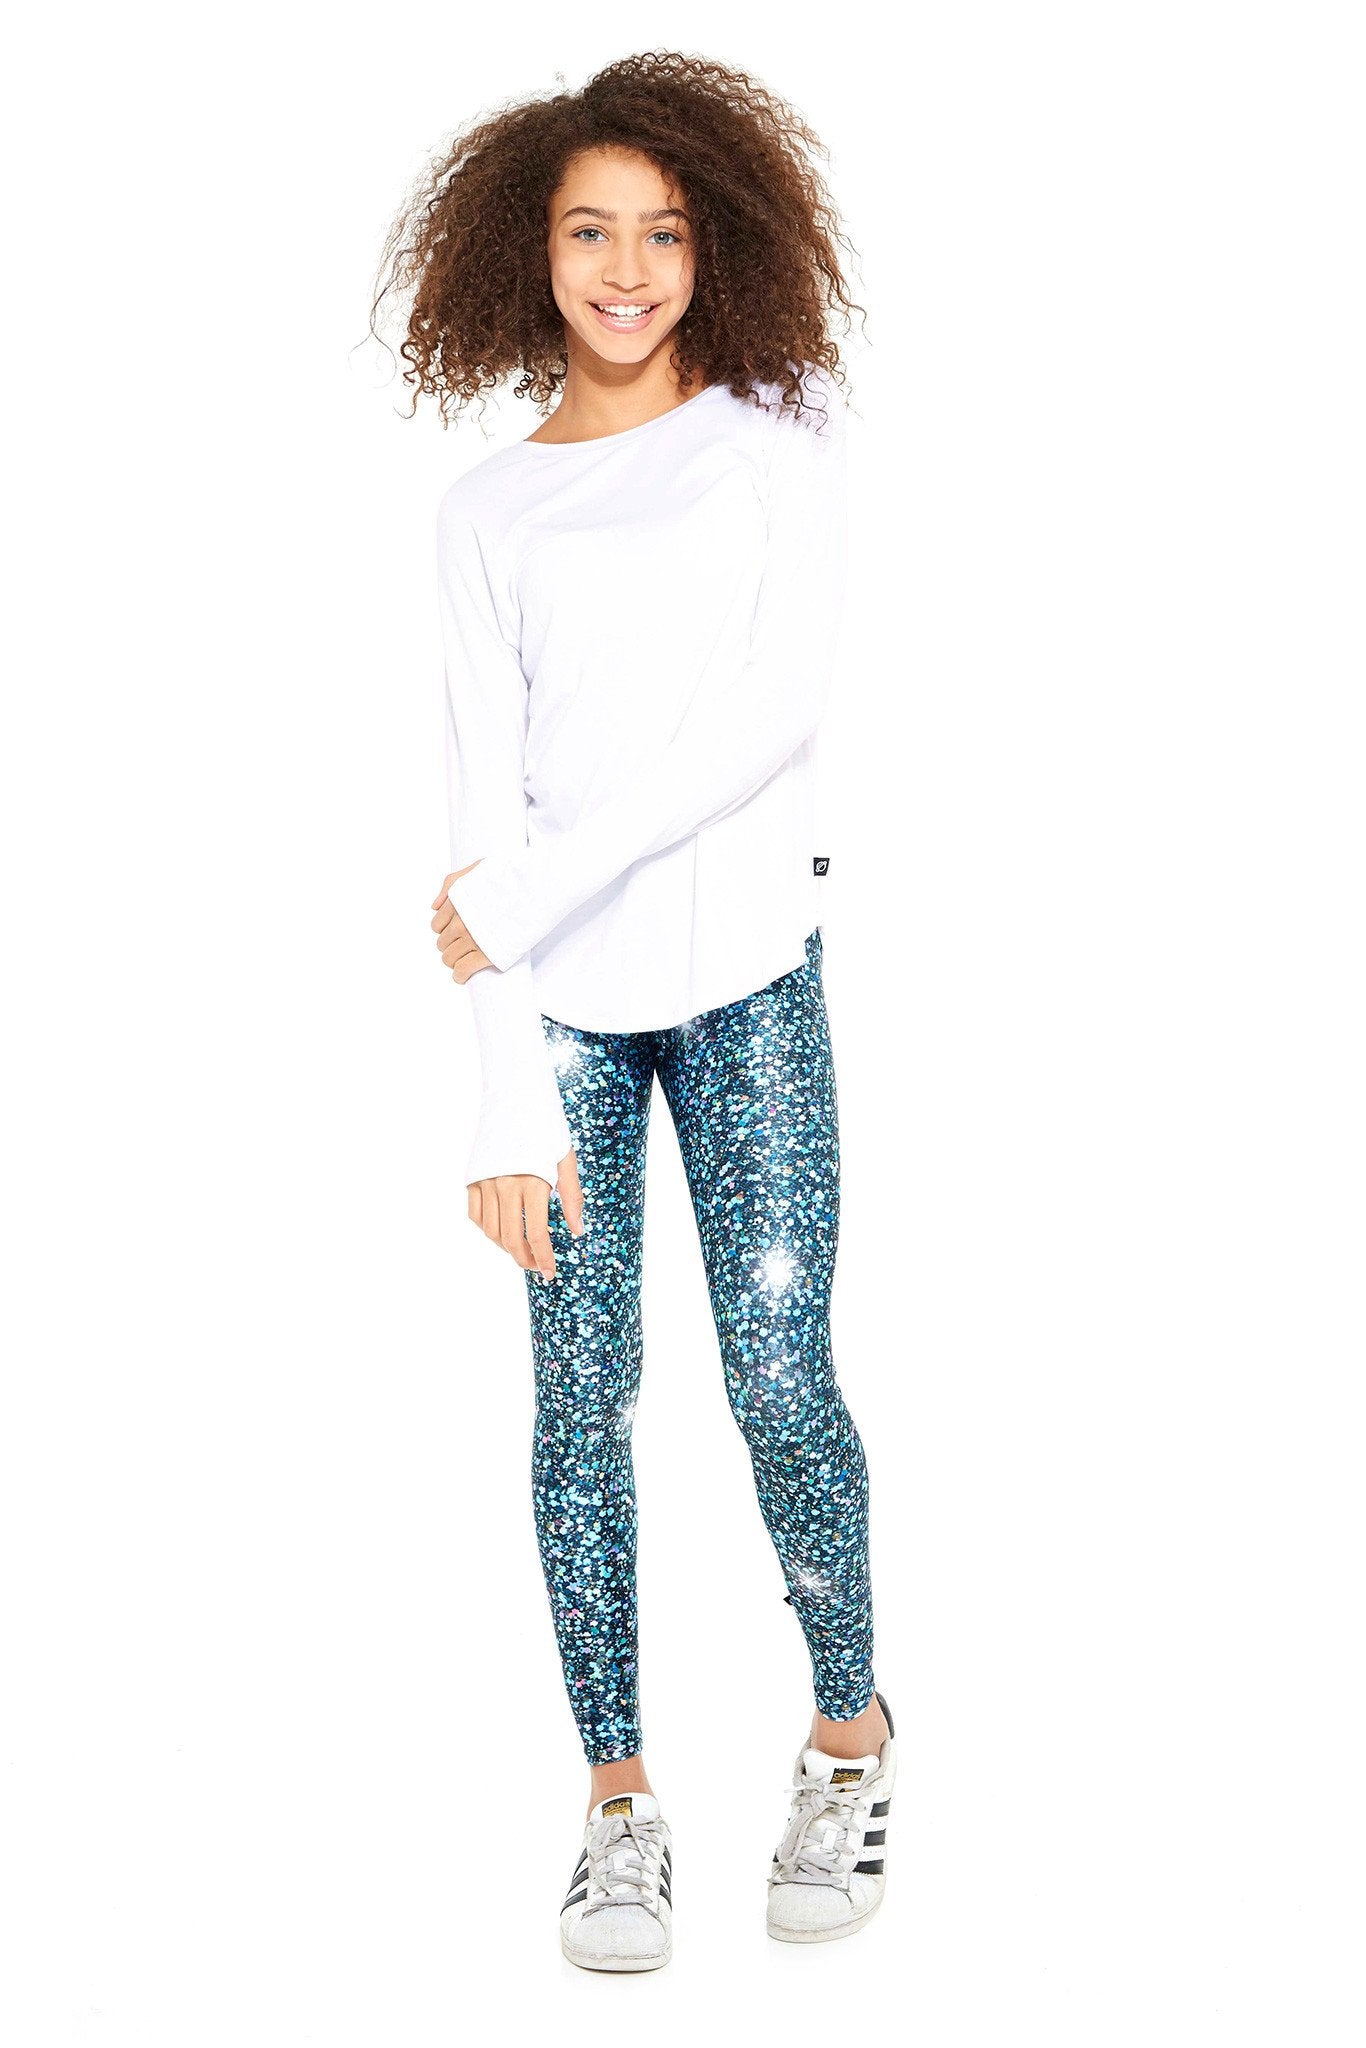 Buy Withchic Gold Sequin Sparkle Leggings Shiny Bling Tights Glitter Pants  M at Amazon.in